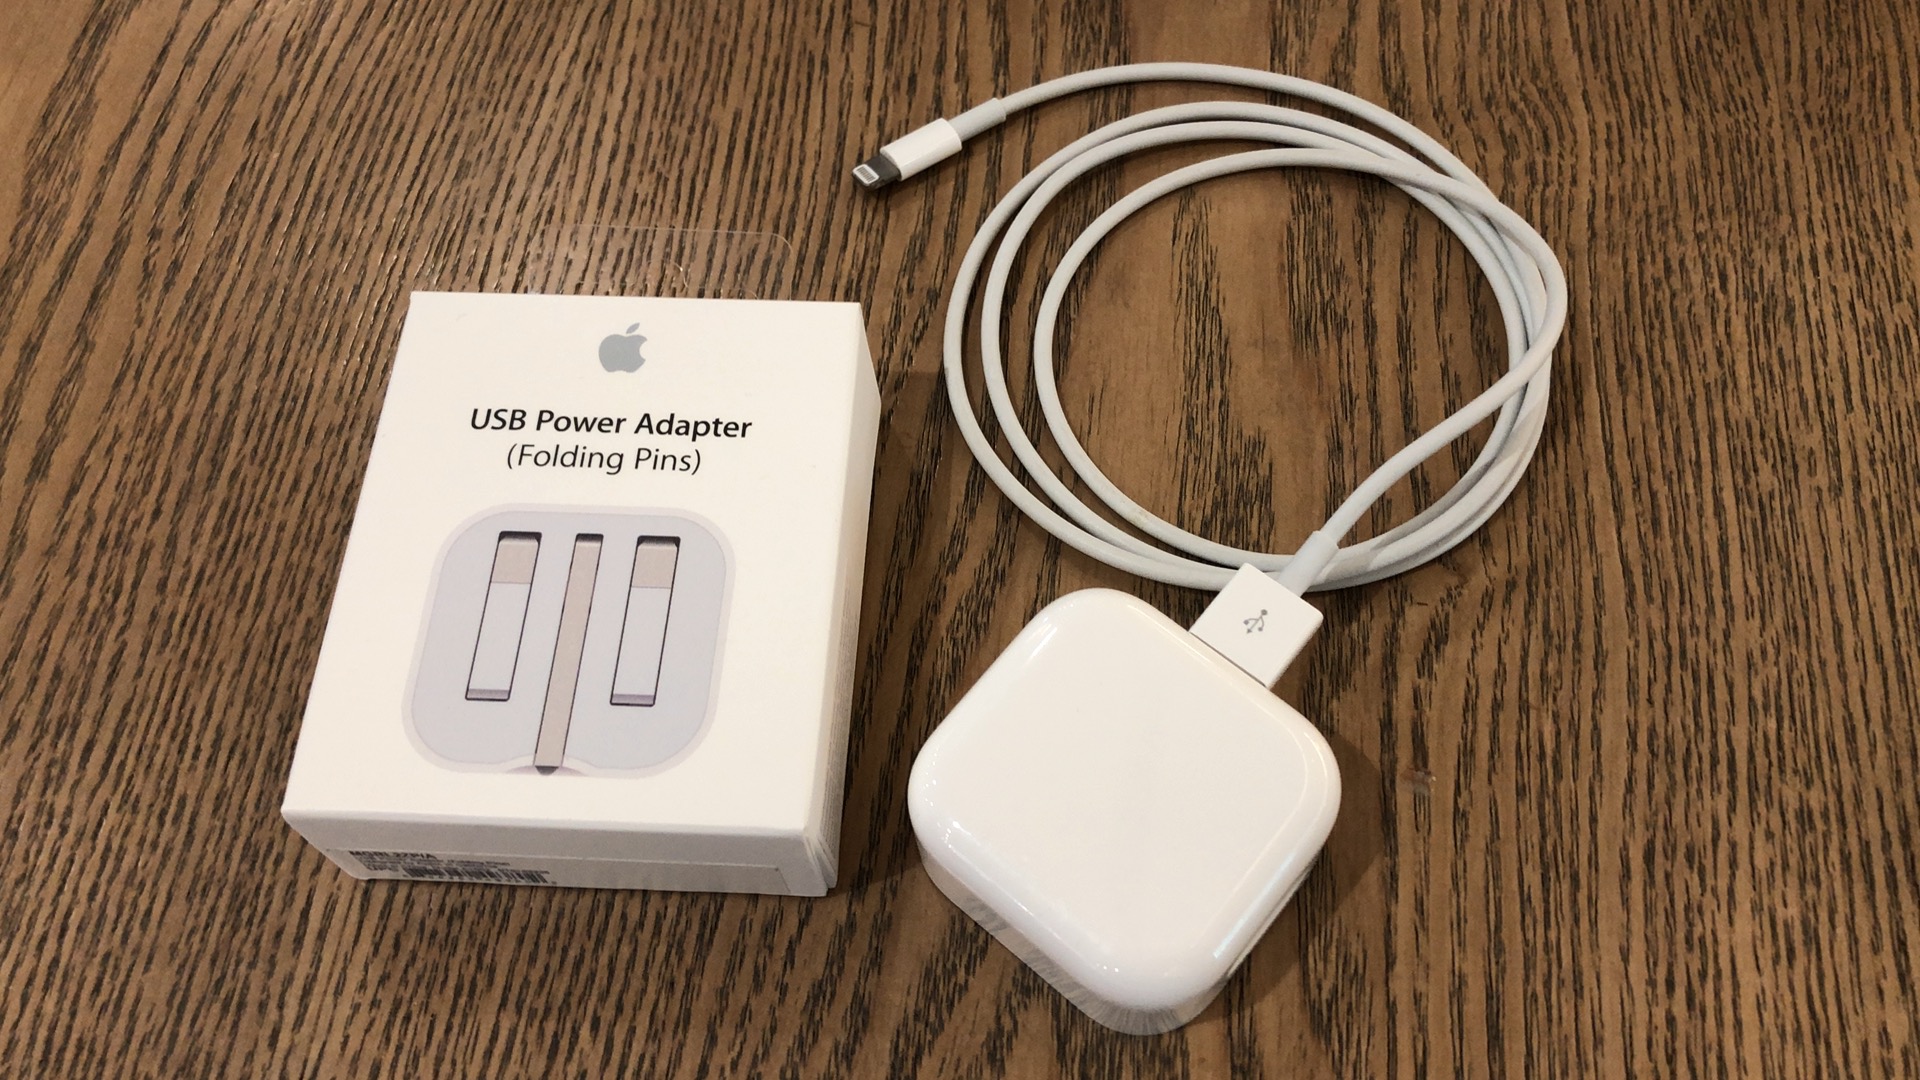 apple-hk-usb-power-adapter-folding-pins-5w-review-1